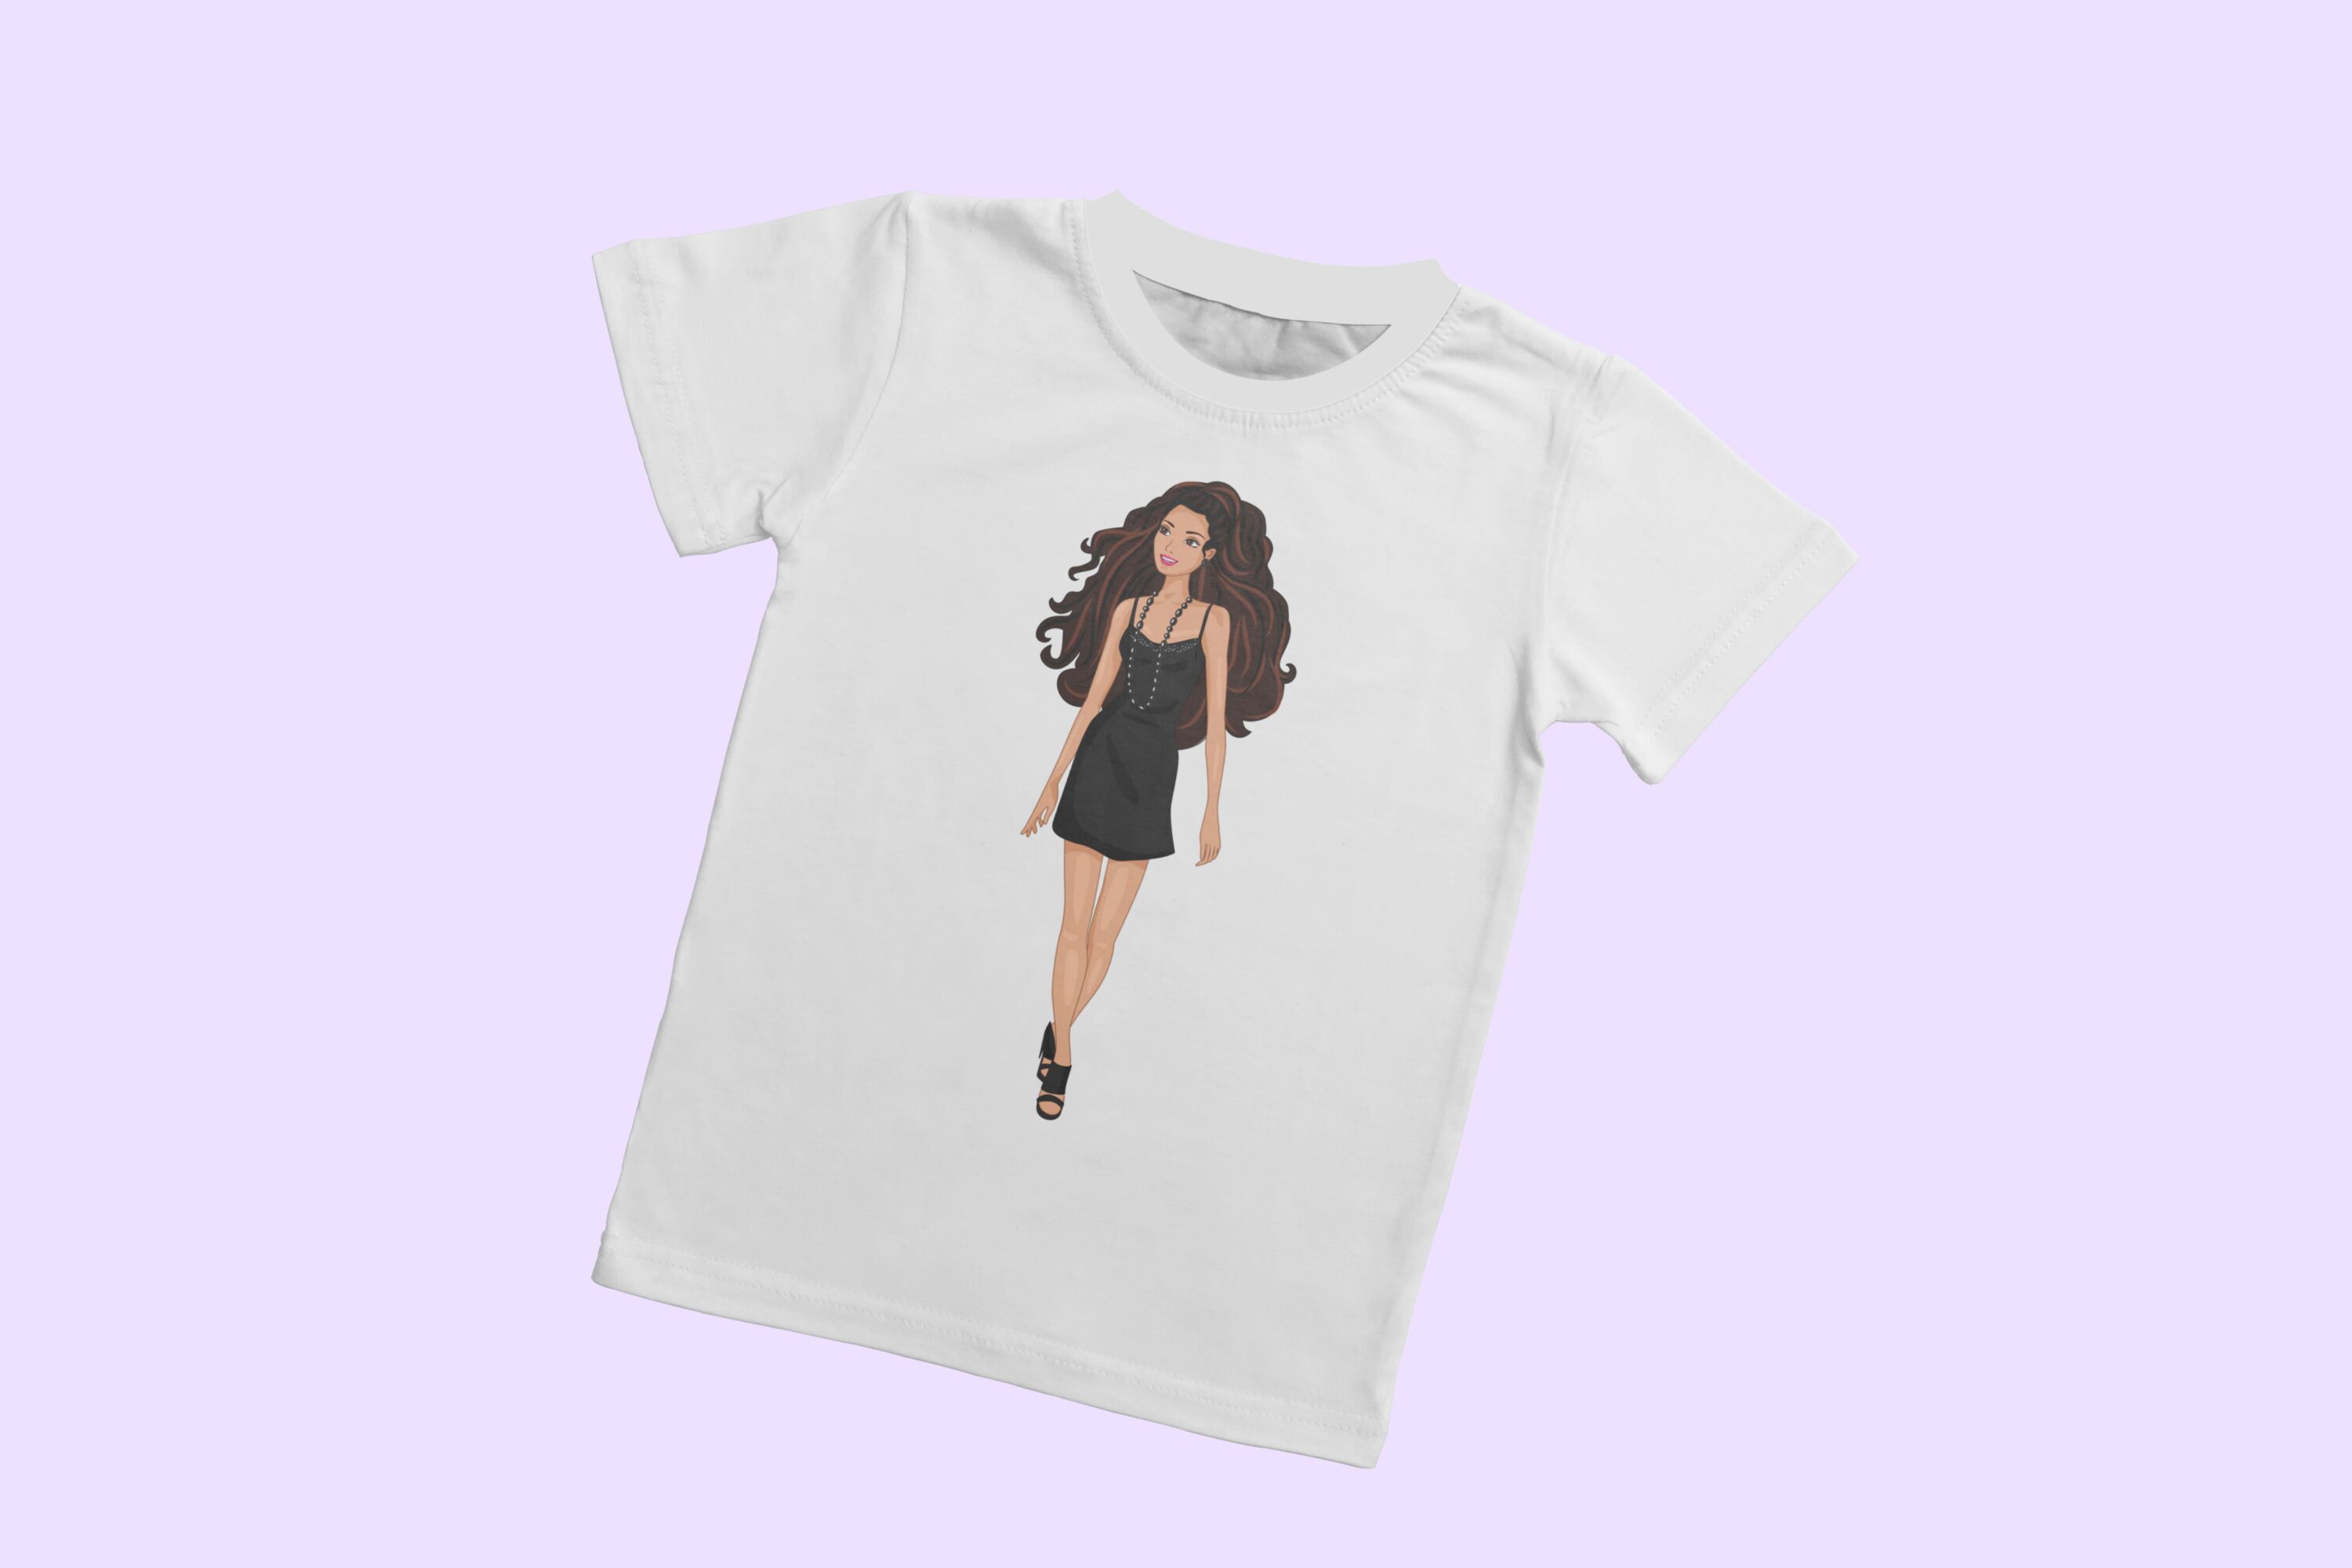 Beautiful barbie in black on a t-shirt.